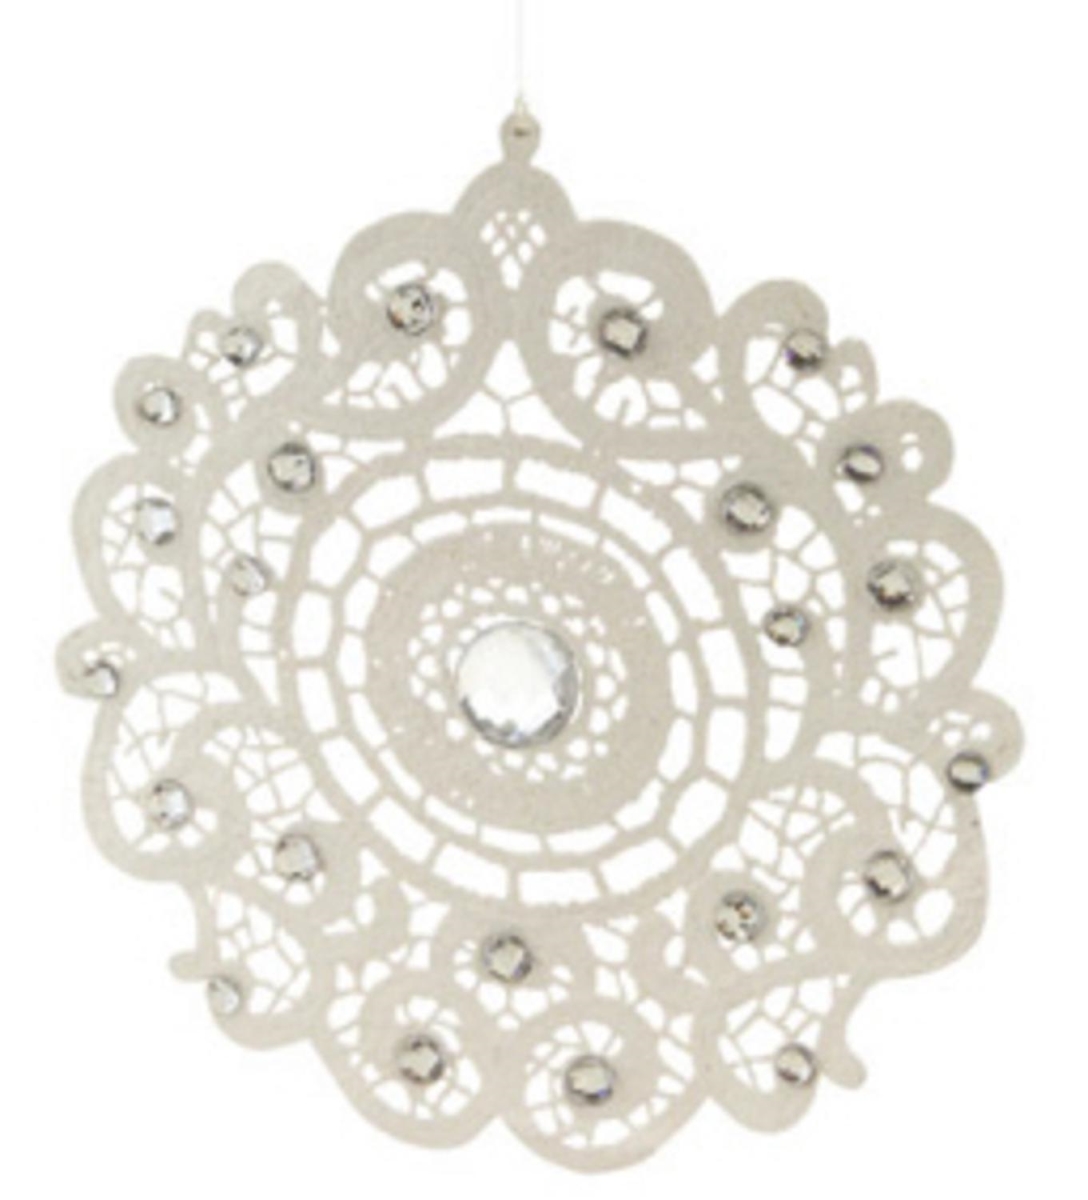 31452653 8 In. Elegant Jeweled White Lace Round Doily Style Christmas Ornament